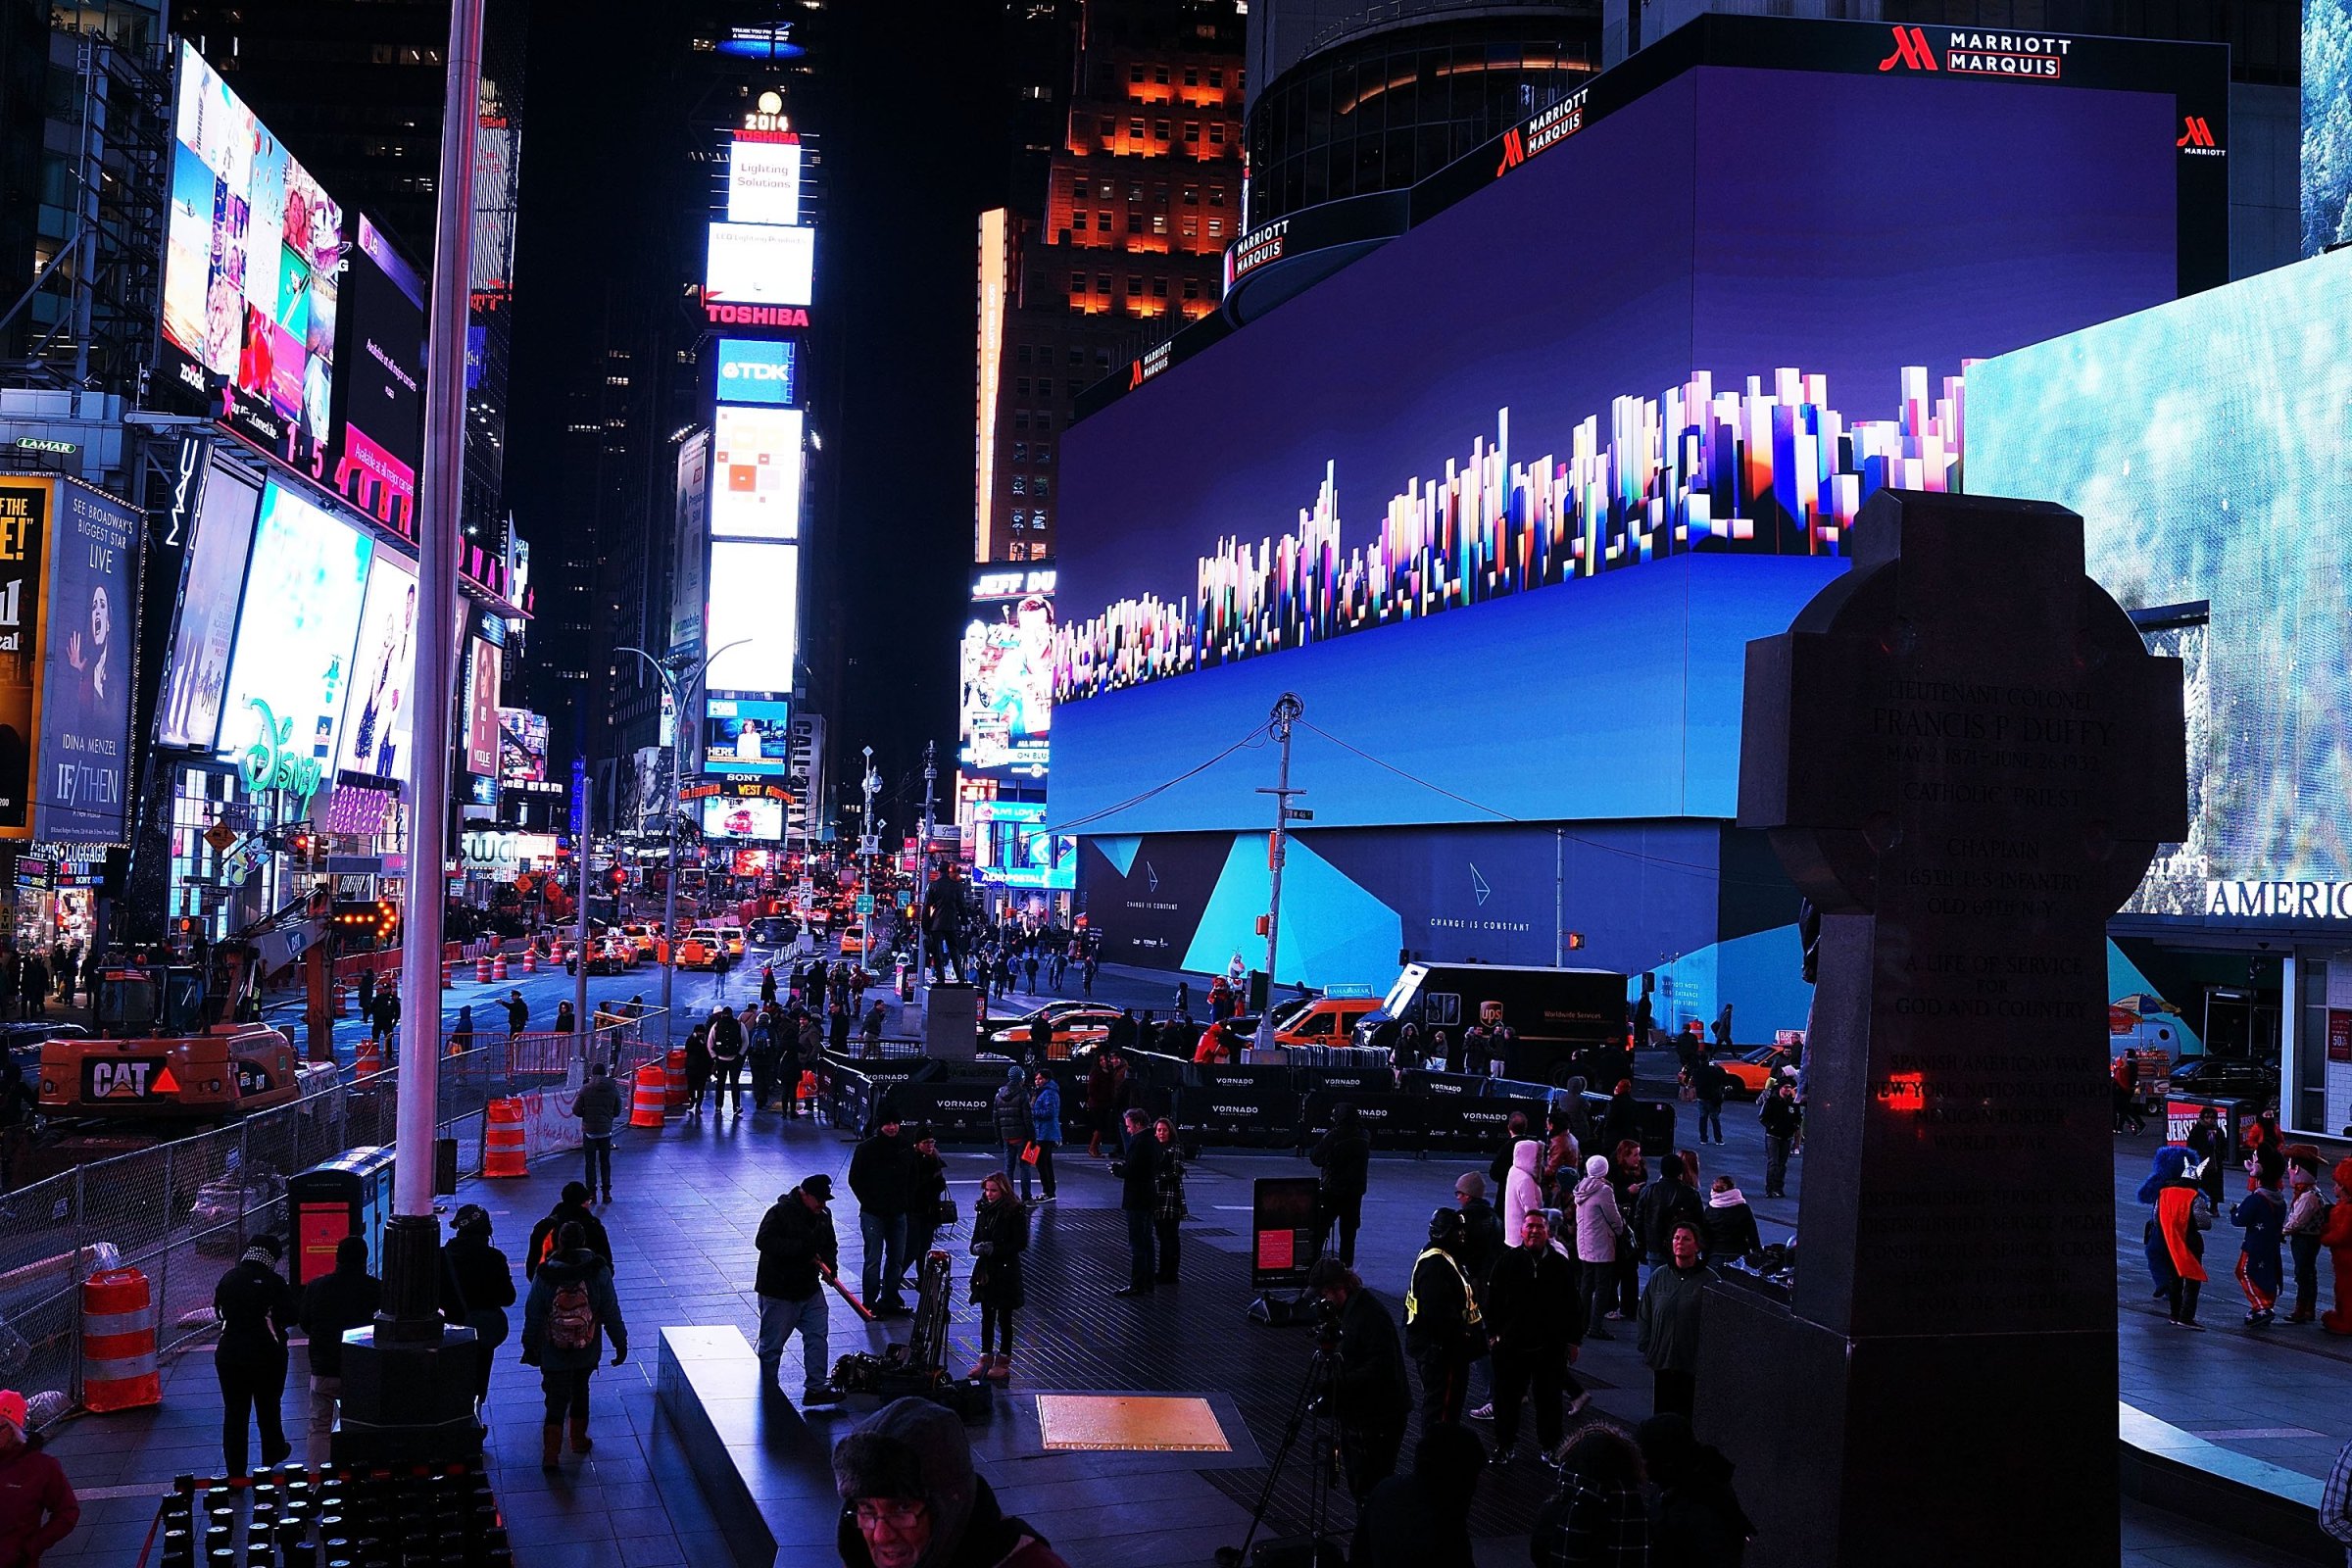 Billed as Times Square's largest and most expensive digital billboard, a new megascreen is debuted in front of the Marriott Marquis hotel on Nov.18, 2014 in New York City.